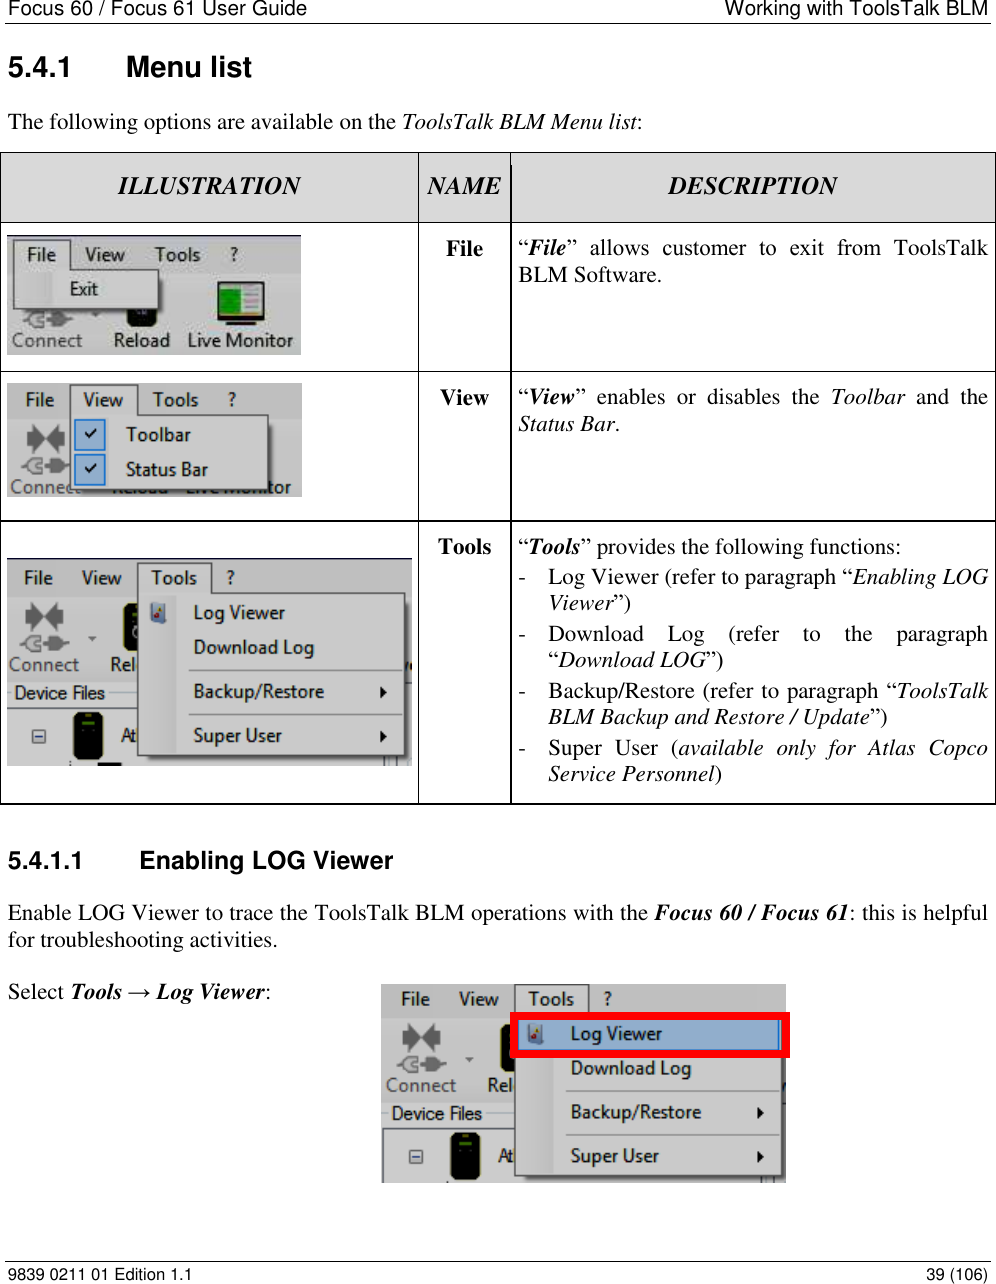 Focus 60 / Focus 61 User Guide  Working with ToolsTalk BLM 9839 0211 01 Edition 1.1    39 (106) 5.4.1  Menu list The following options are available on the ToolsTalk BLM Menu list: ILLUSTRATION NAME DESCRIPTION  File “File”  allows  customer  to  exit  from  ToolsTalk BLM Software.   View “View”  enables  or  disables  the  Toolbar  and  the Status Bar.    Tools “Tools” provides the following functions: - Log Viewer (refer to paragraph “Enabling LOG Viewer”) - Download  Log  (refer  to  the  paragraph “Download LOG”) - Backup/Restore (refer to paragraph “ToolsTalk BLM Backup and Restore / Update”) - Super  User  (available  only  for  Atlas  Copco Service Personnel) 5.4.1.1  Enabling LOG Viewer  Enable LOG Viewer to trace the ToolsTalk BLM operations with the Focus 60 / Focus 61: this is helpful for troubleshooting activities.  Select Tools → Log Viewer:         